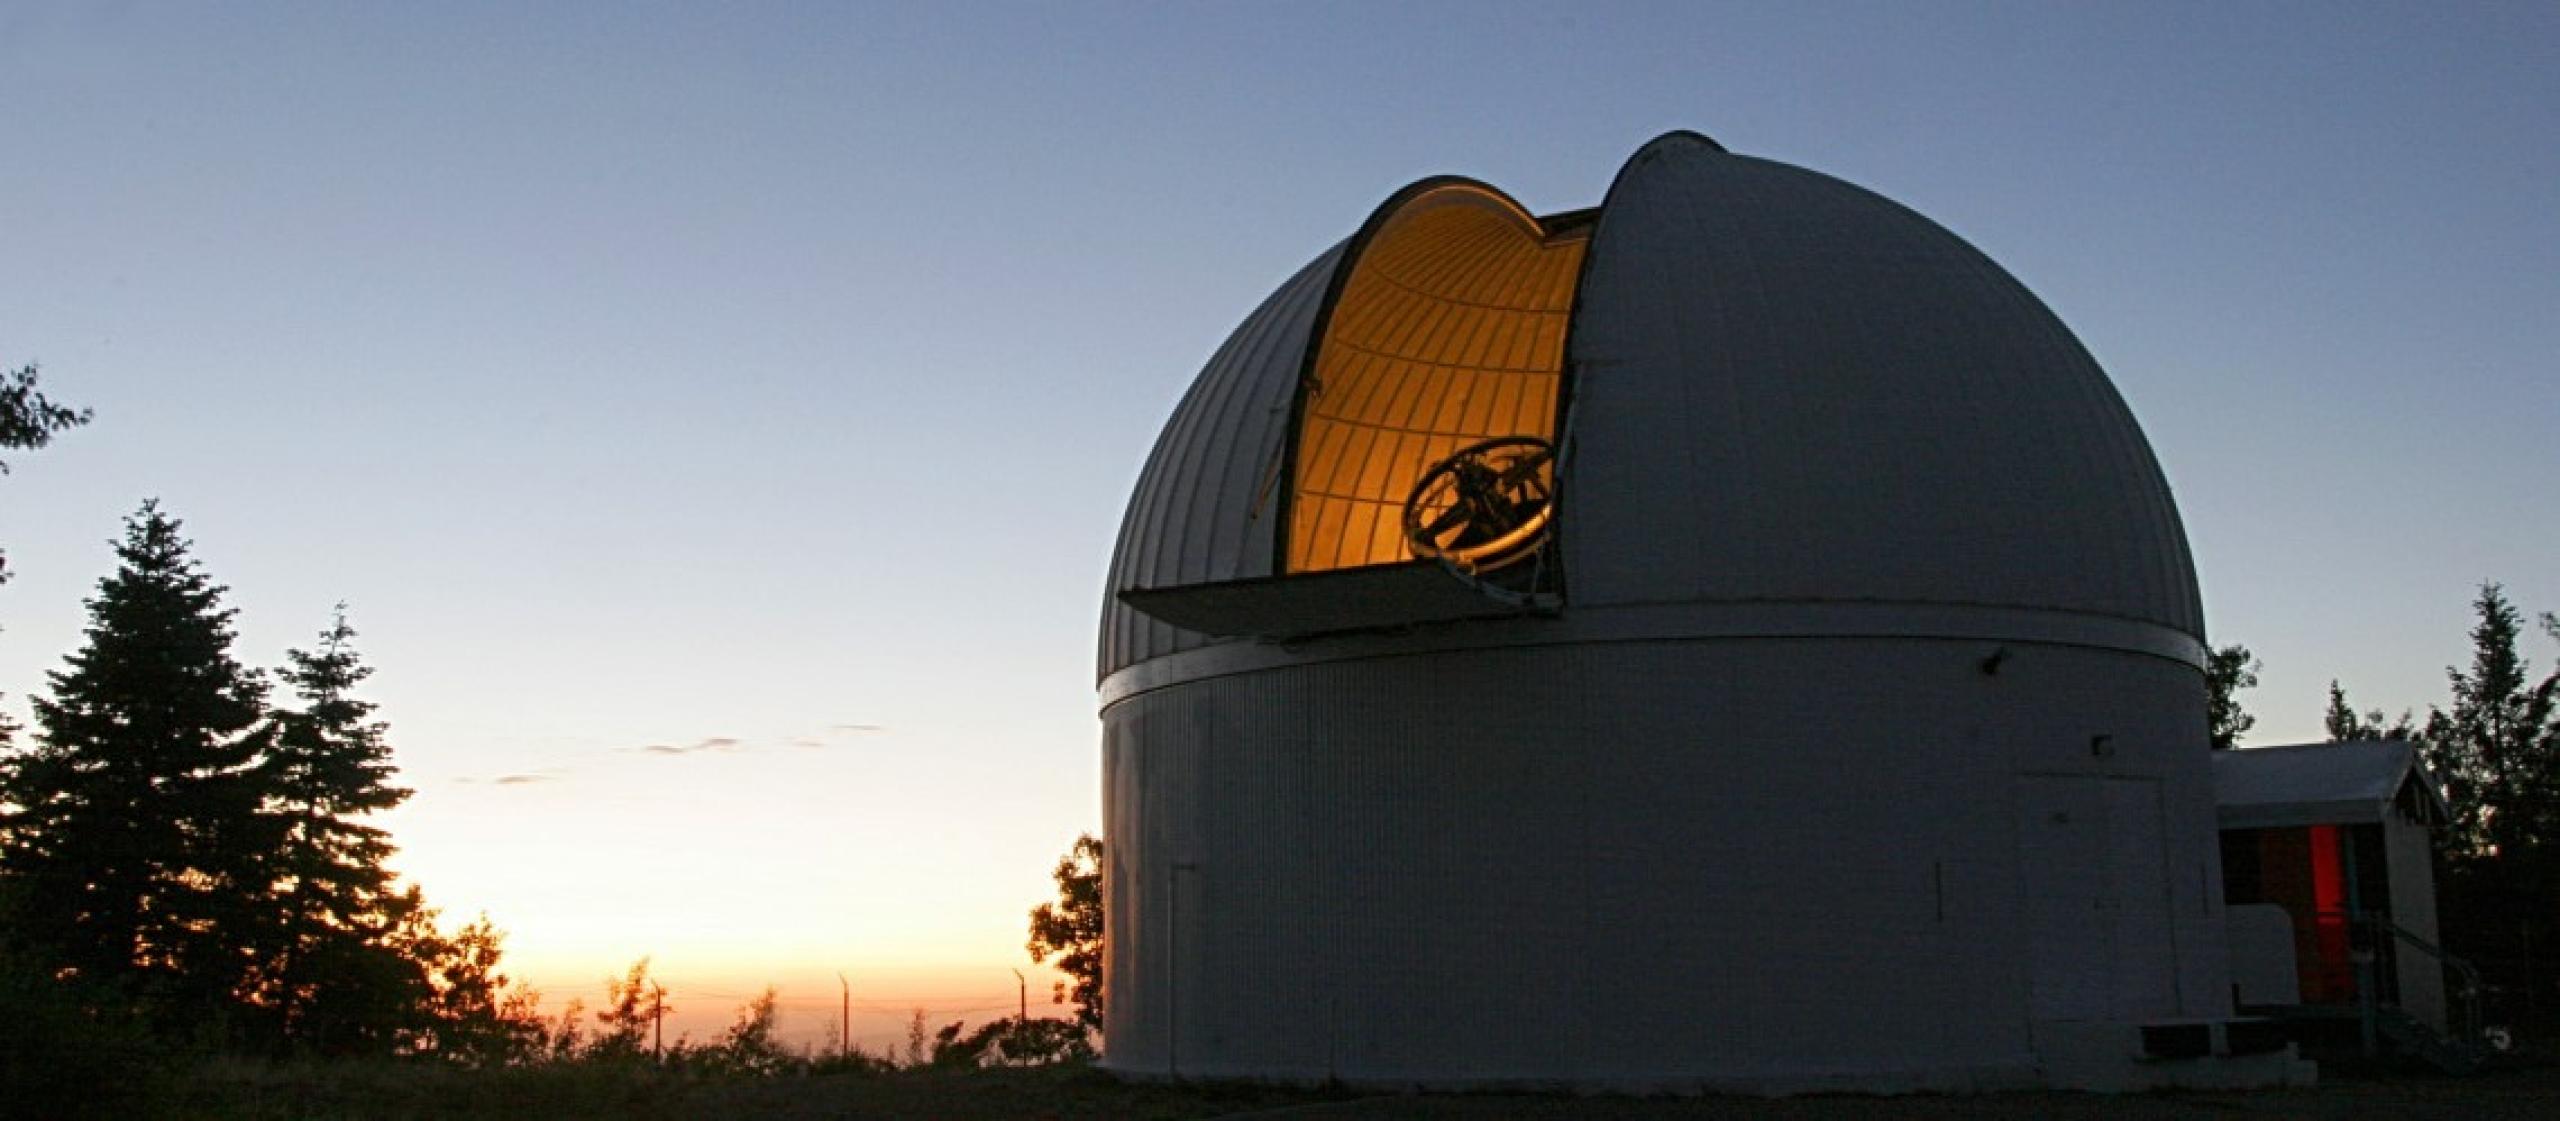 One of the telescopes used in the Catalina Sky Survey. The sun sets behind the telescope dome, which is open.